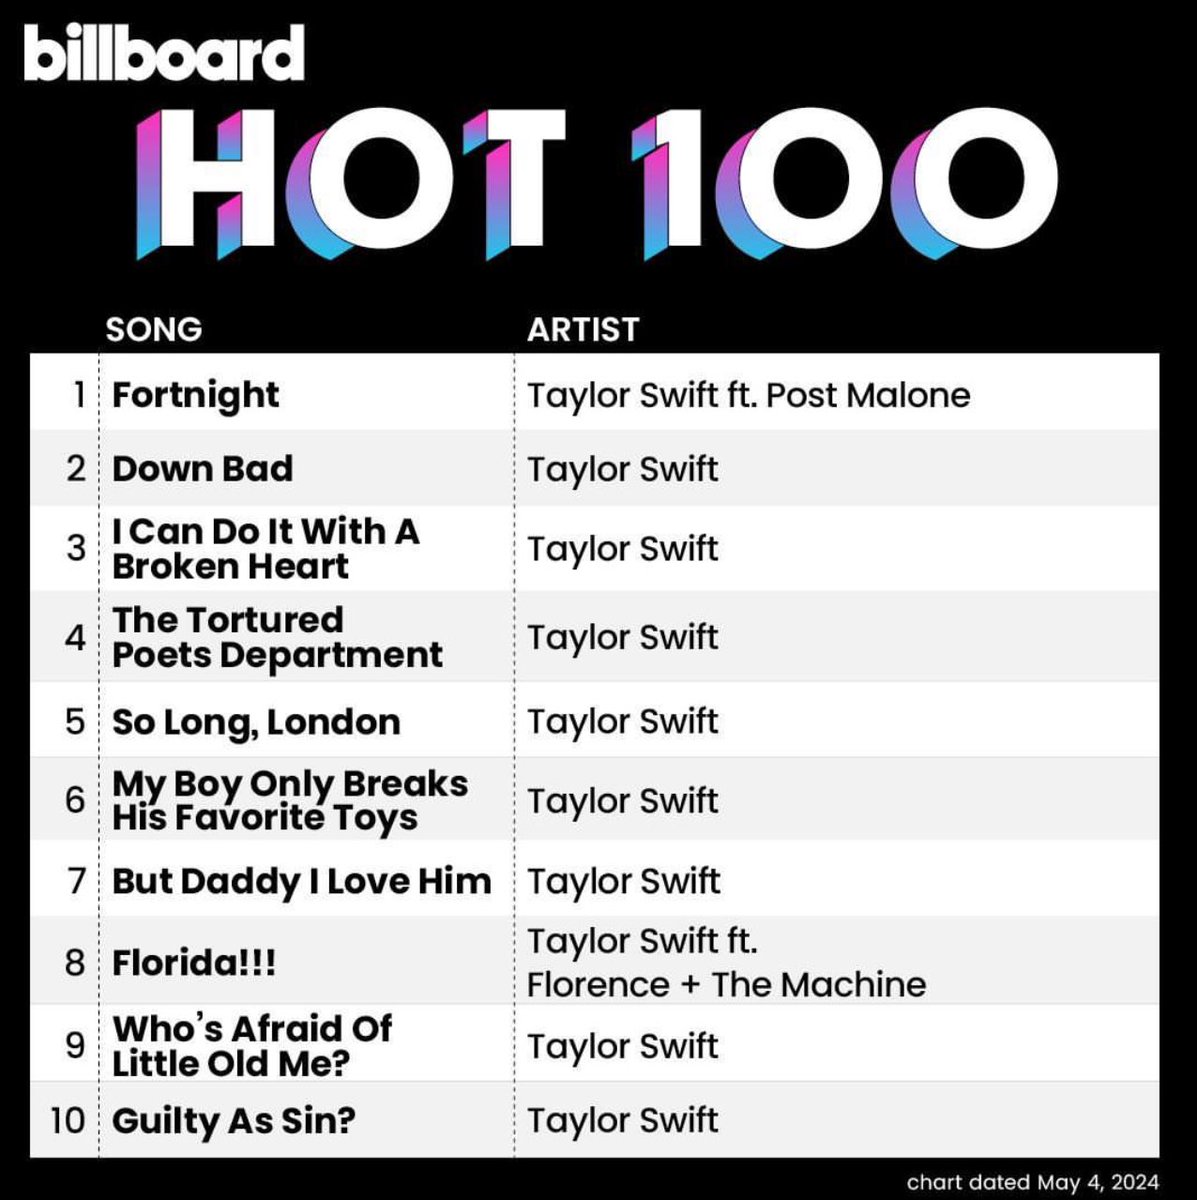 The Top 10 of this week’s Billboard Hot 100.